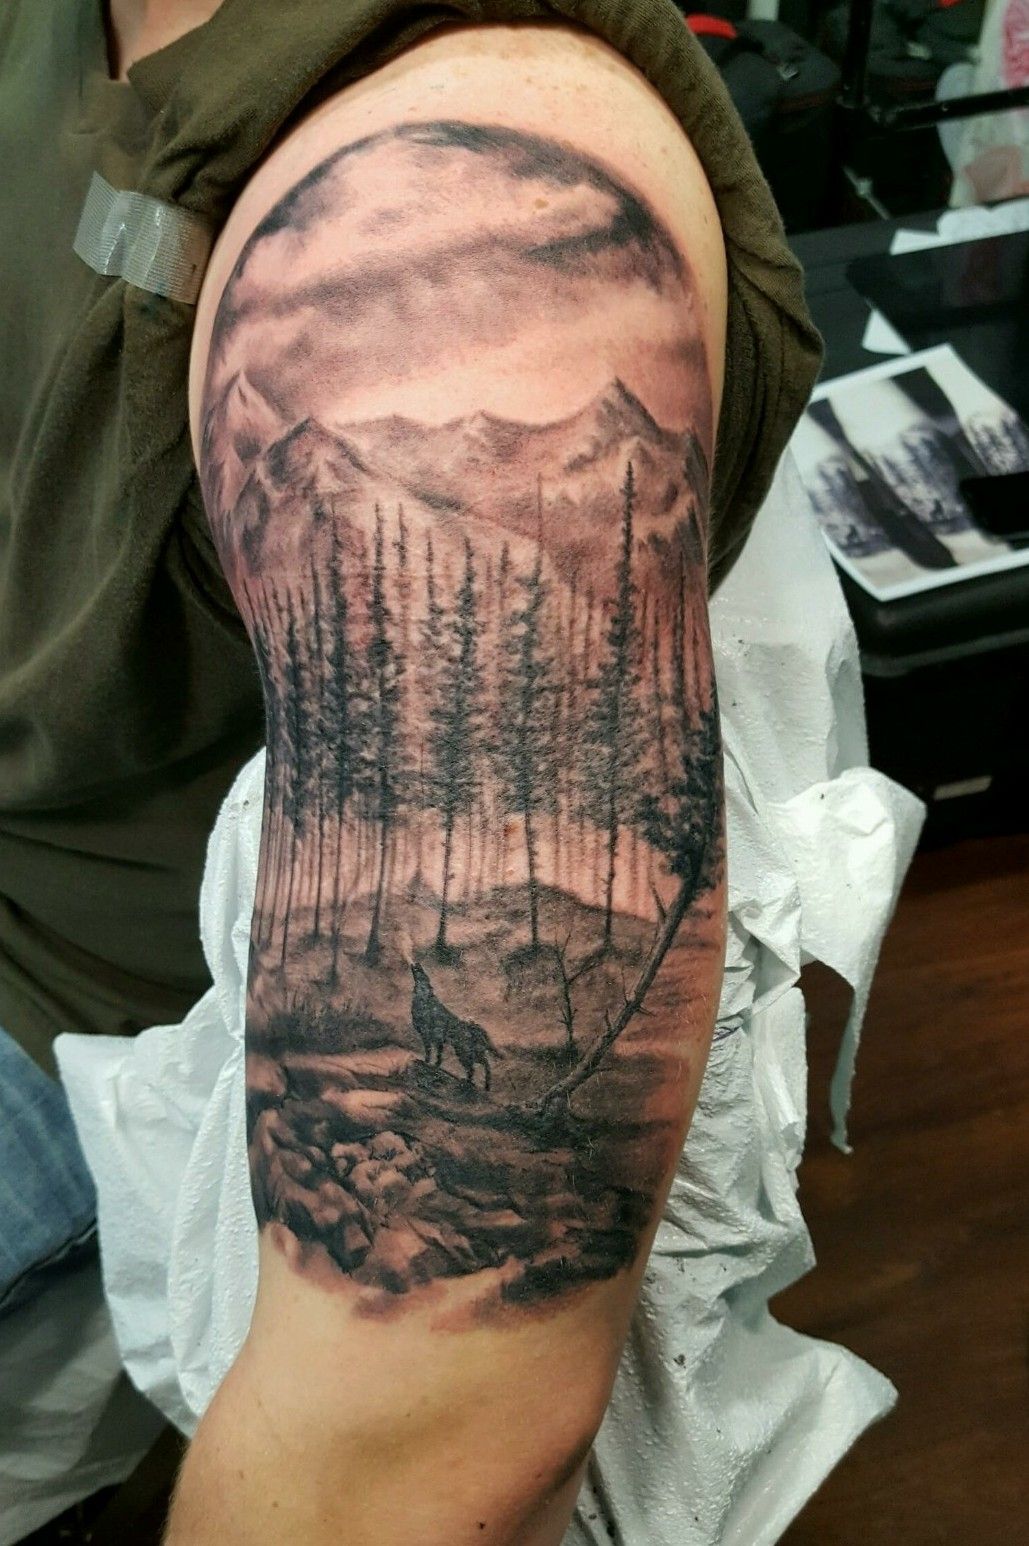 Tattoo uploaded by Sean Wesley  Awesome nature tattoo I got from Jon  Leathers at Splash of Color in East Lansing Michigan  Tattoodo